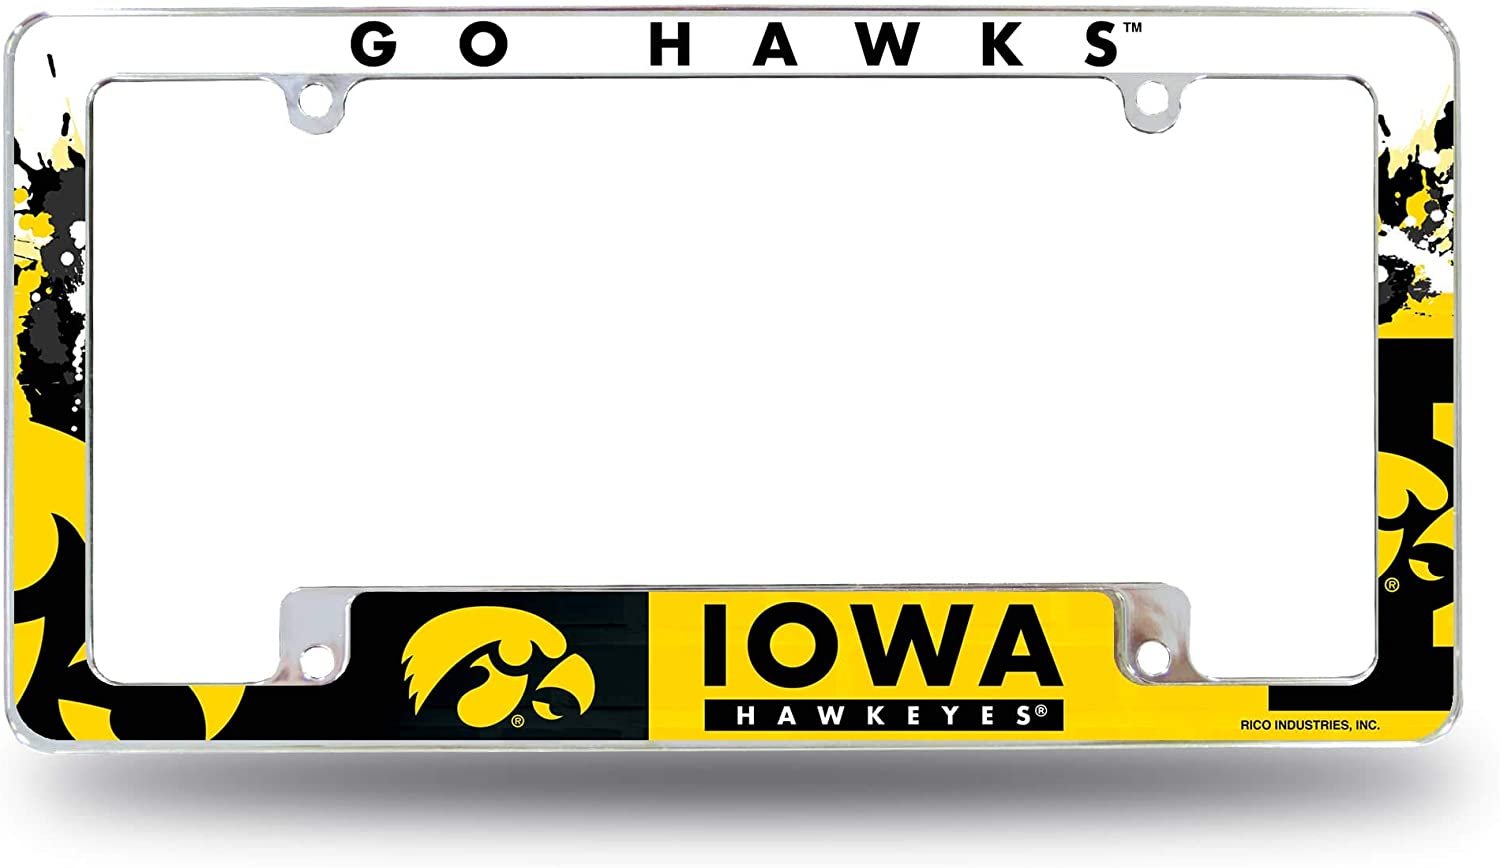 Iowa Hawkeyes Metal License Plate Frame Tag Cover All Over Design University of